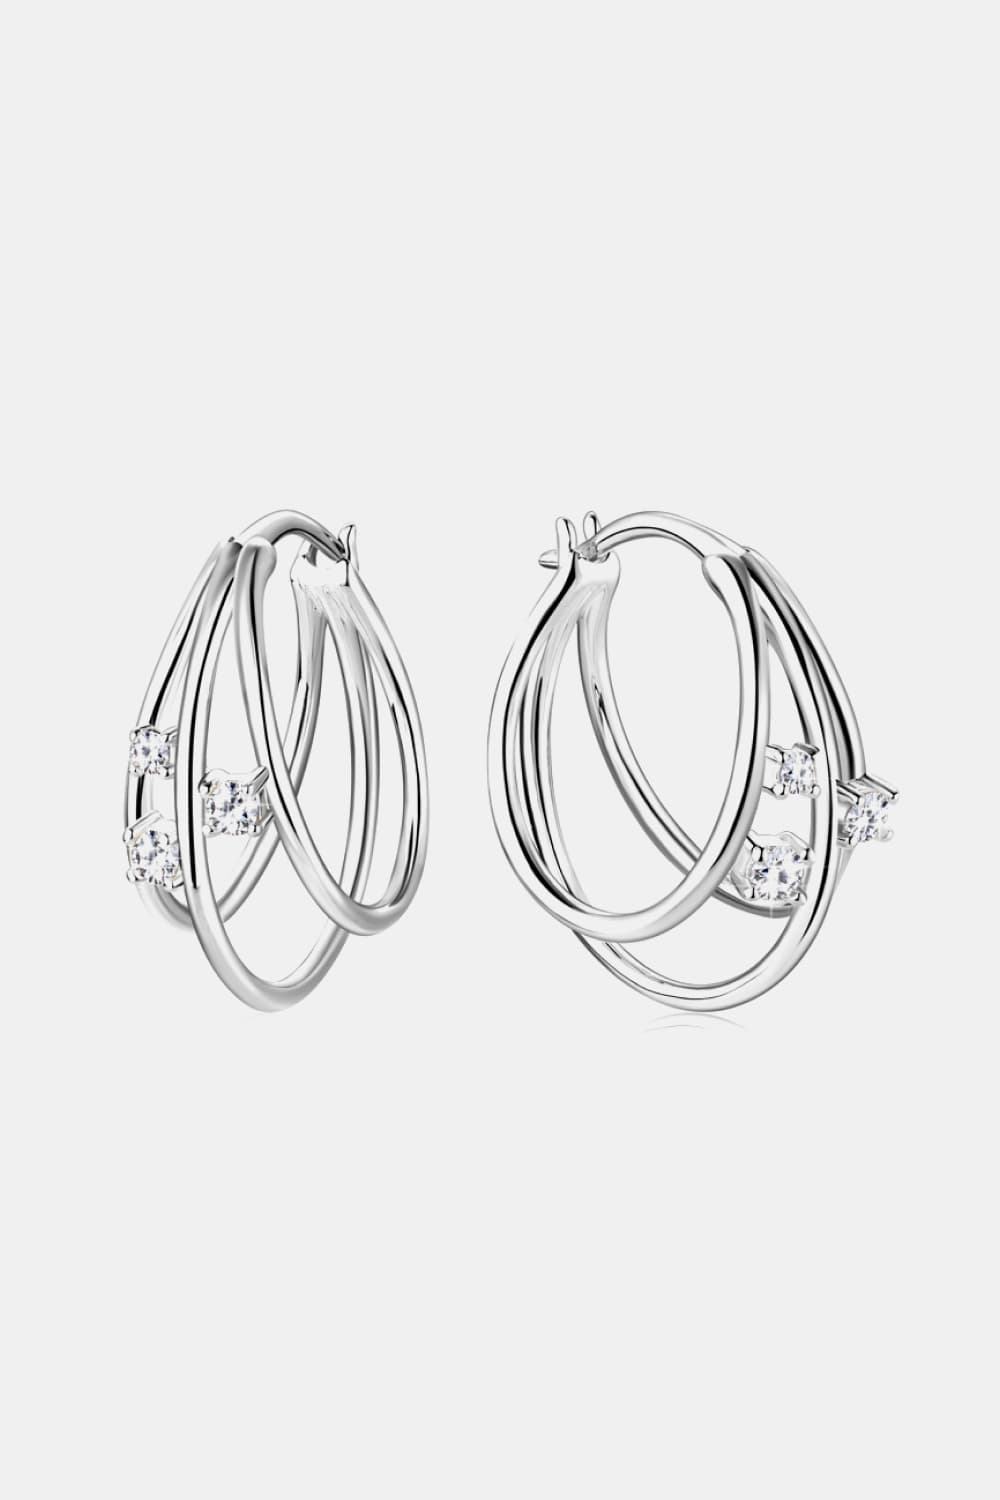 Moissanite 925 Sterling Silver Layered Earrings The Stout Steer